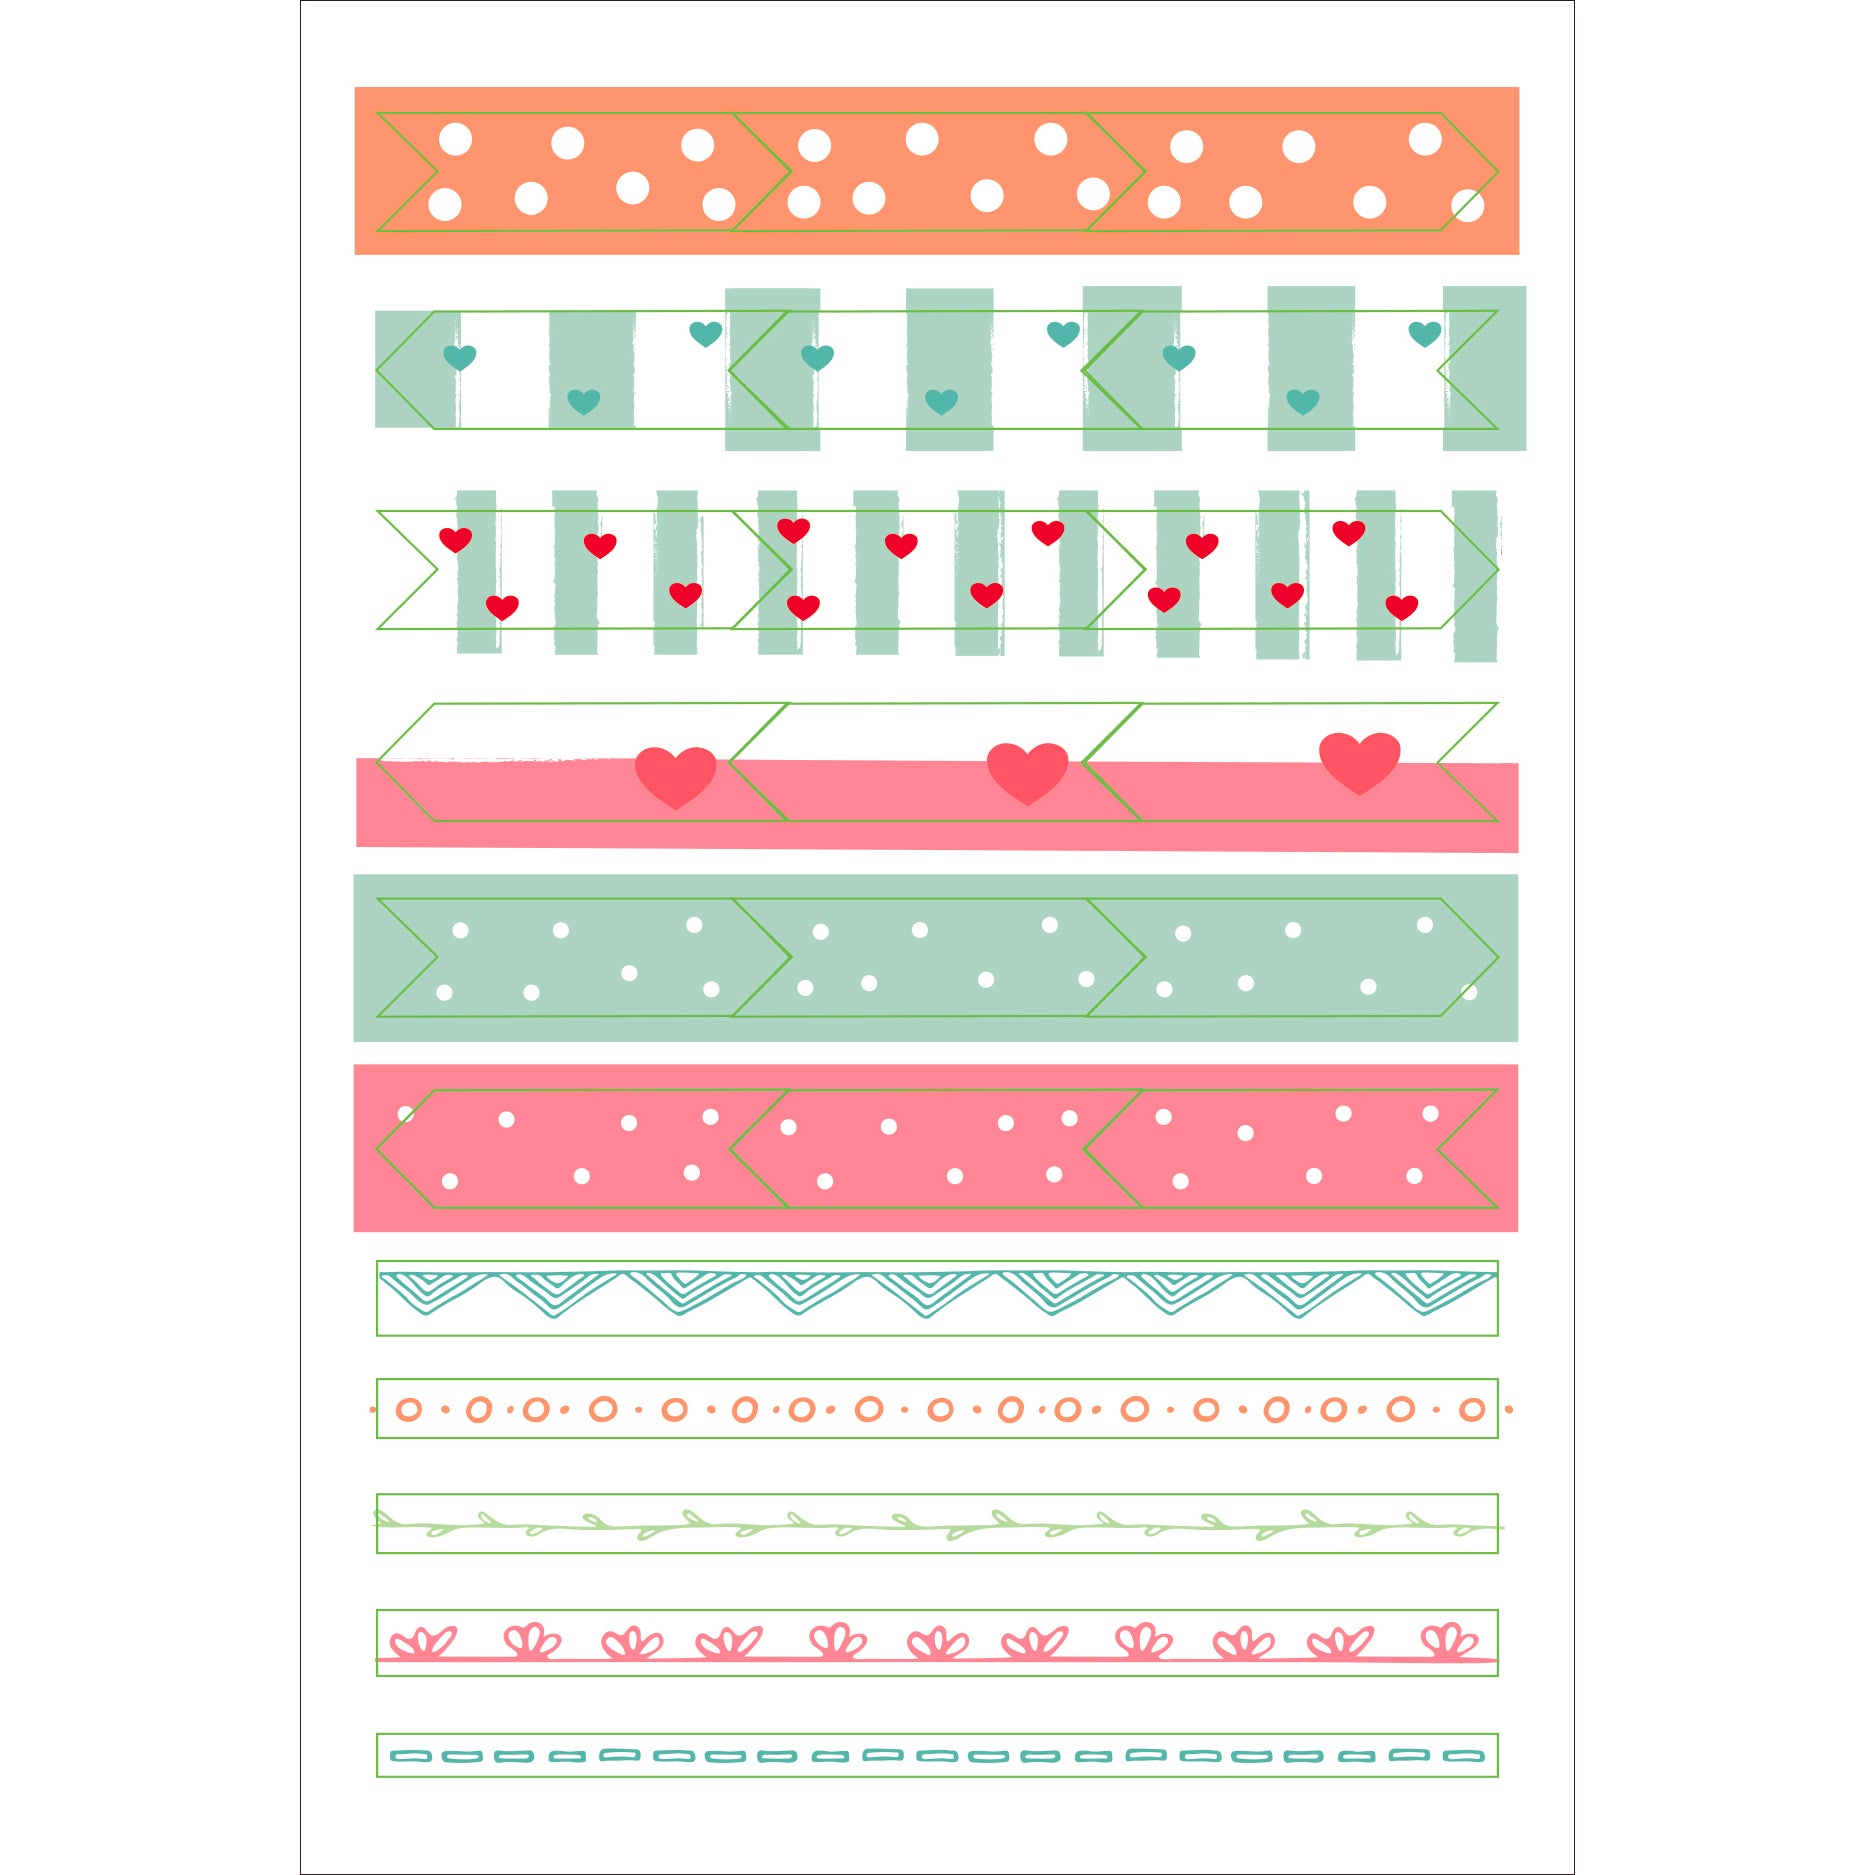 Dotted Journal Planner Stickers - 12 sheets - Paper Kooka